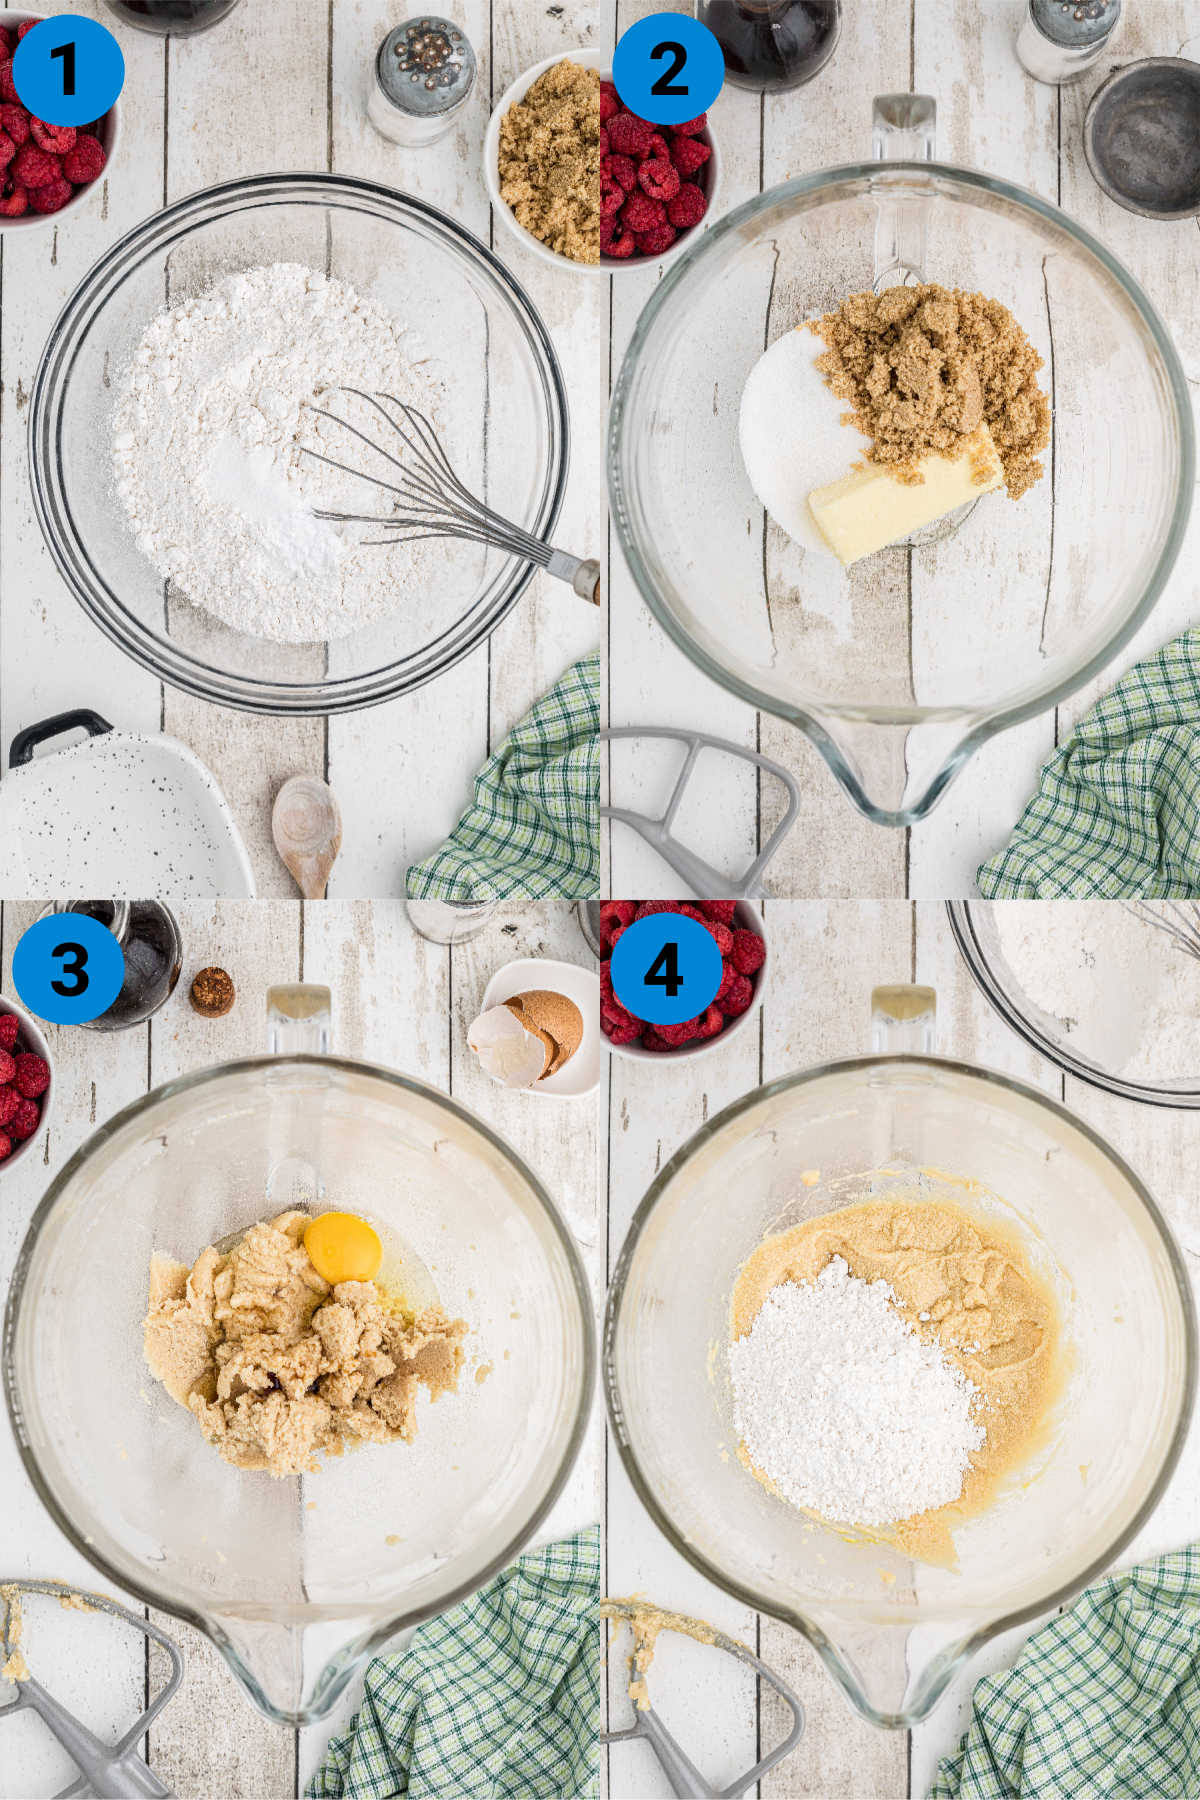 A collage of four images showing how to make white chocolate raspberry cookies - recipe steps 1-4.